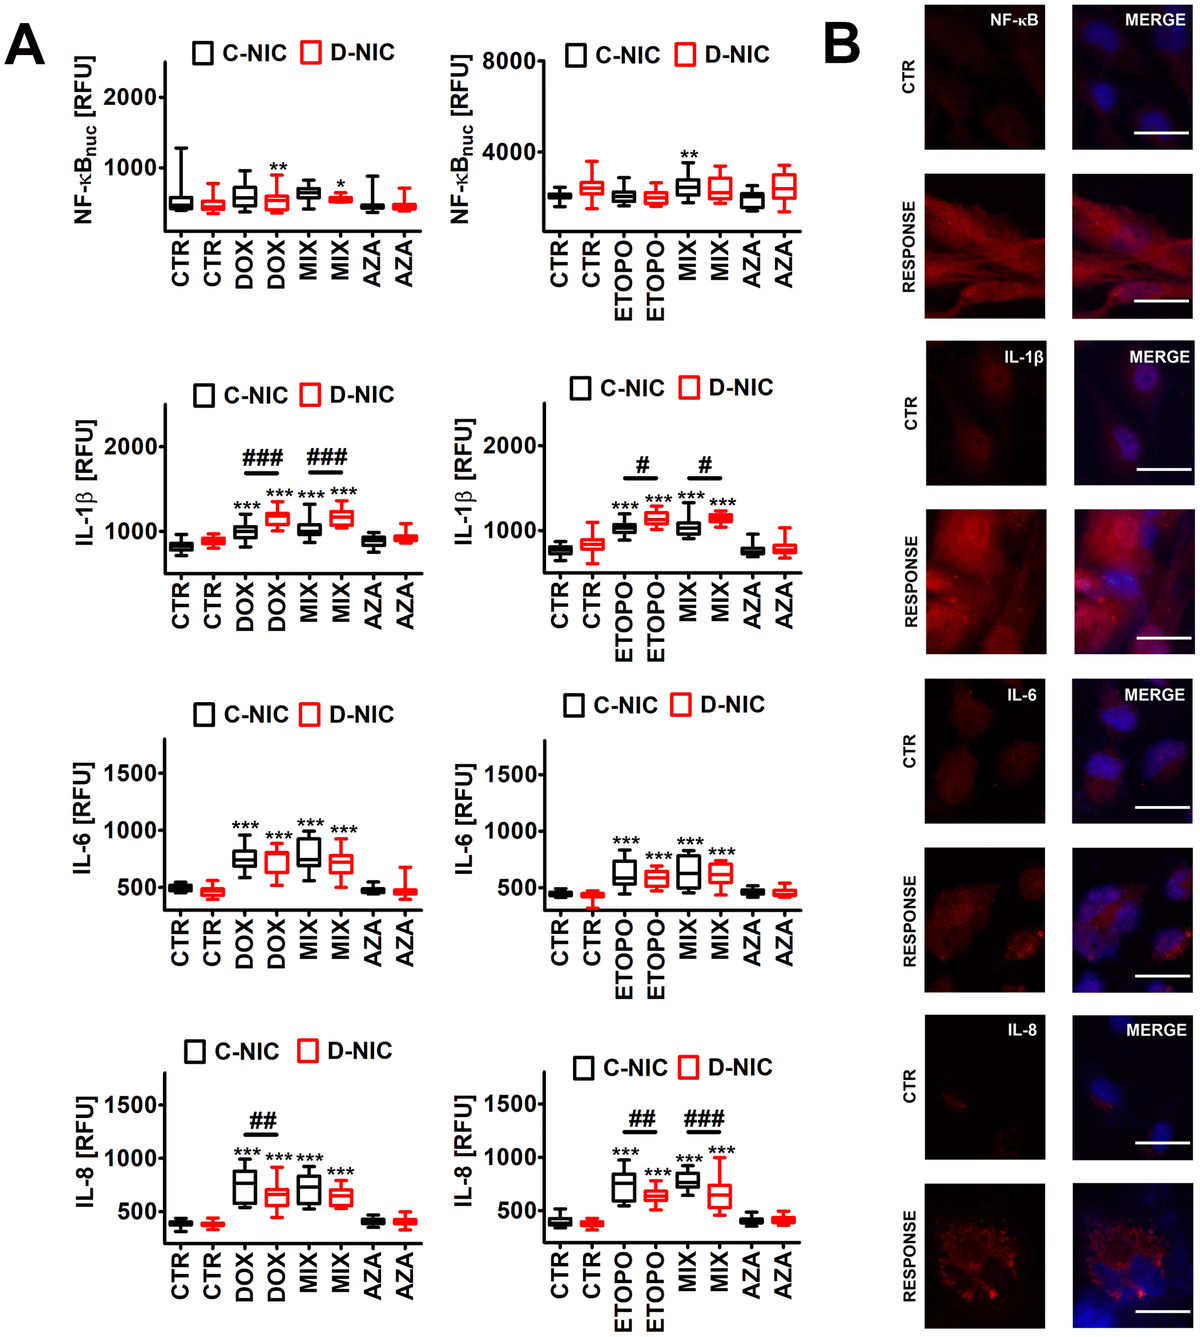 DNMT2/TRDMT1 gene knockout-mediated senescence-associated secretory phenotype (SASP) (A, B) in U-251 MG glioblastoma cells treated with DOX or ETOPO. (A) The levels of NF-κB, IL-1β, IL-6 and IL-8 are expressed as relative fluorescence units (RFU). Box and whisker plots are shown, n = 3, ***p **p *p a posteriori test), ###p ##p #p a posteriori test). (B) NF-κB, IL-1β, IL-6 and IL-8 immunostaining (red). Representative microphotographs are shown, objective 20x, nucleus staining (blue), RESPONSE, representative DOX or ETOPO treatment. CTR, control conditions; DOX, doxorubicin treatment; ETOPO, etoposide treatment; AZA, azacytidine treatment; MIX, azacytidine post-treatment; C-NIC, control cells with unmodified levels of DNMT2/TRDMT1 containing control plasmid; D-NIC, cells with DNMT2/TRDMT1 gene knockout containing dedicated DNMT2 double nickase plasmid.